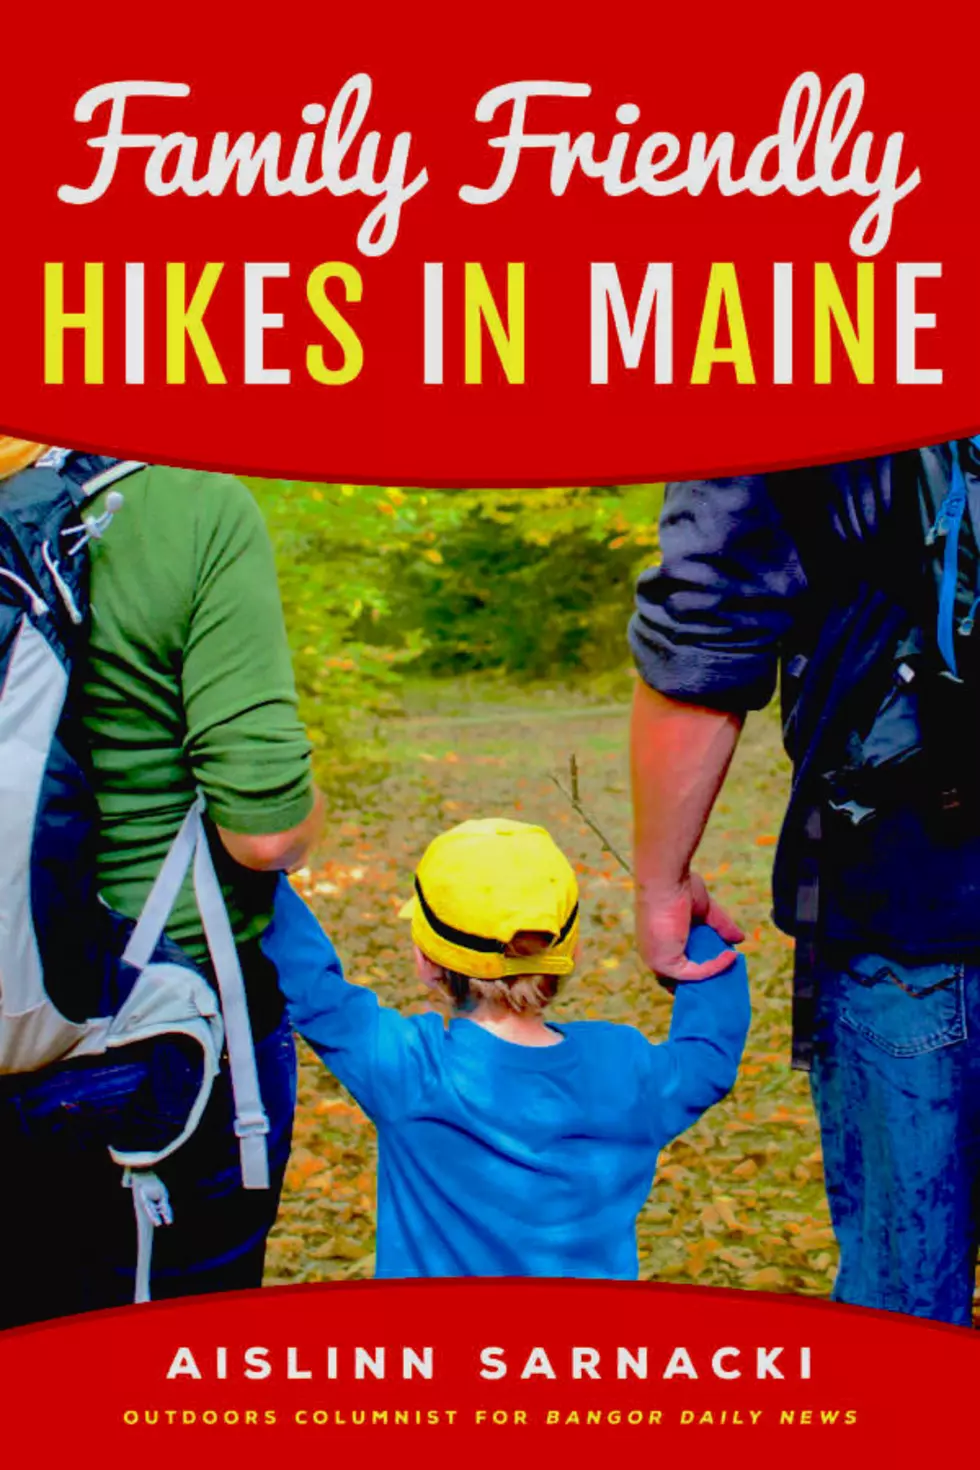 Wondering Where to Hike in Maine? Let This Guide Book Lend a Hand